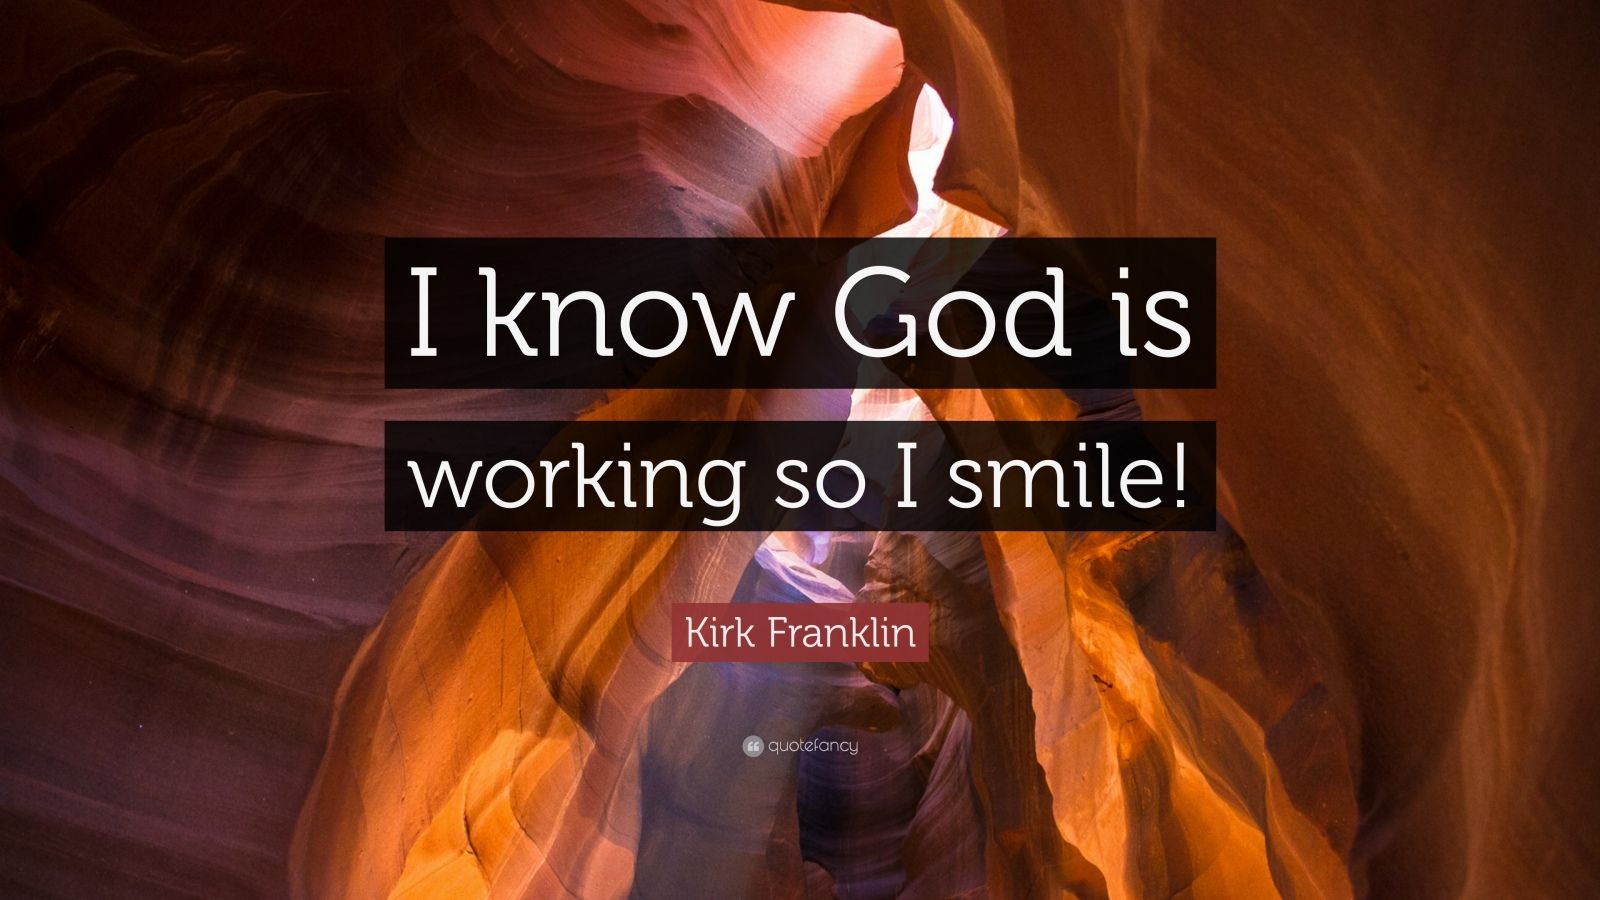 Kirk Franklin Quote “I know God is working so I smile!” (10 wallpapers) Quotefancy